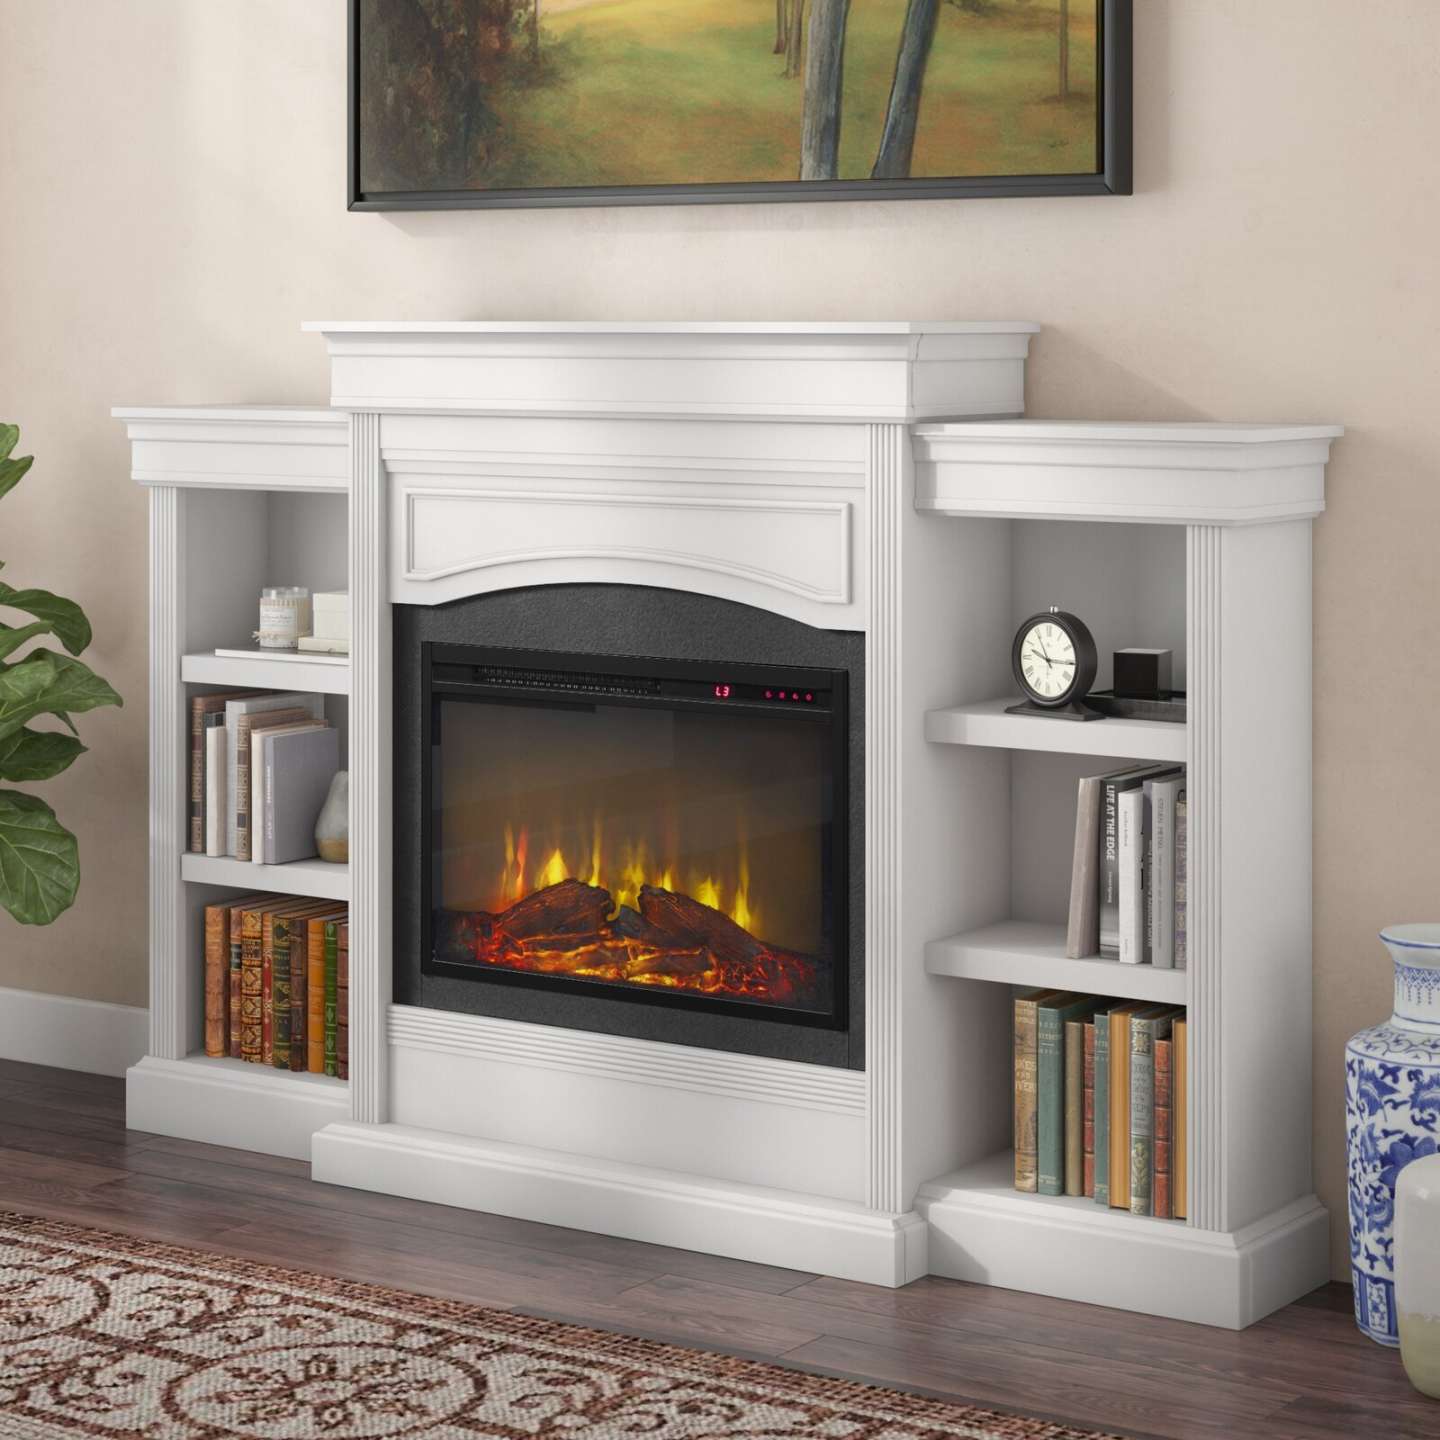 Fake Wall Fireplaces - Foter